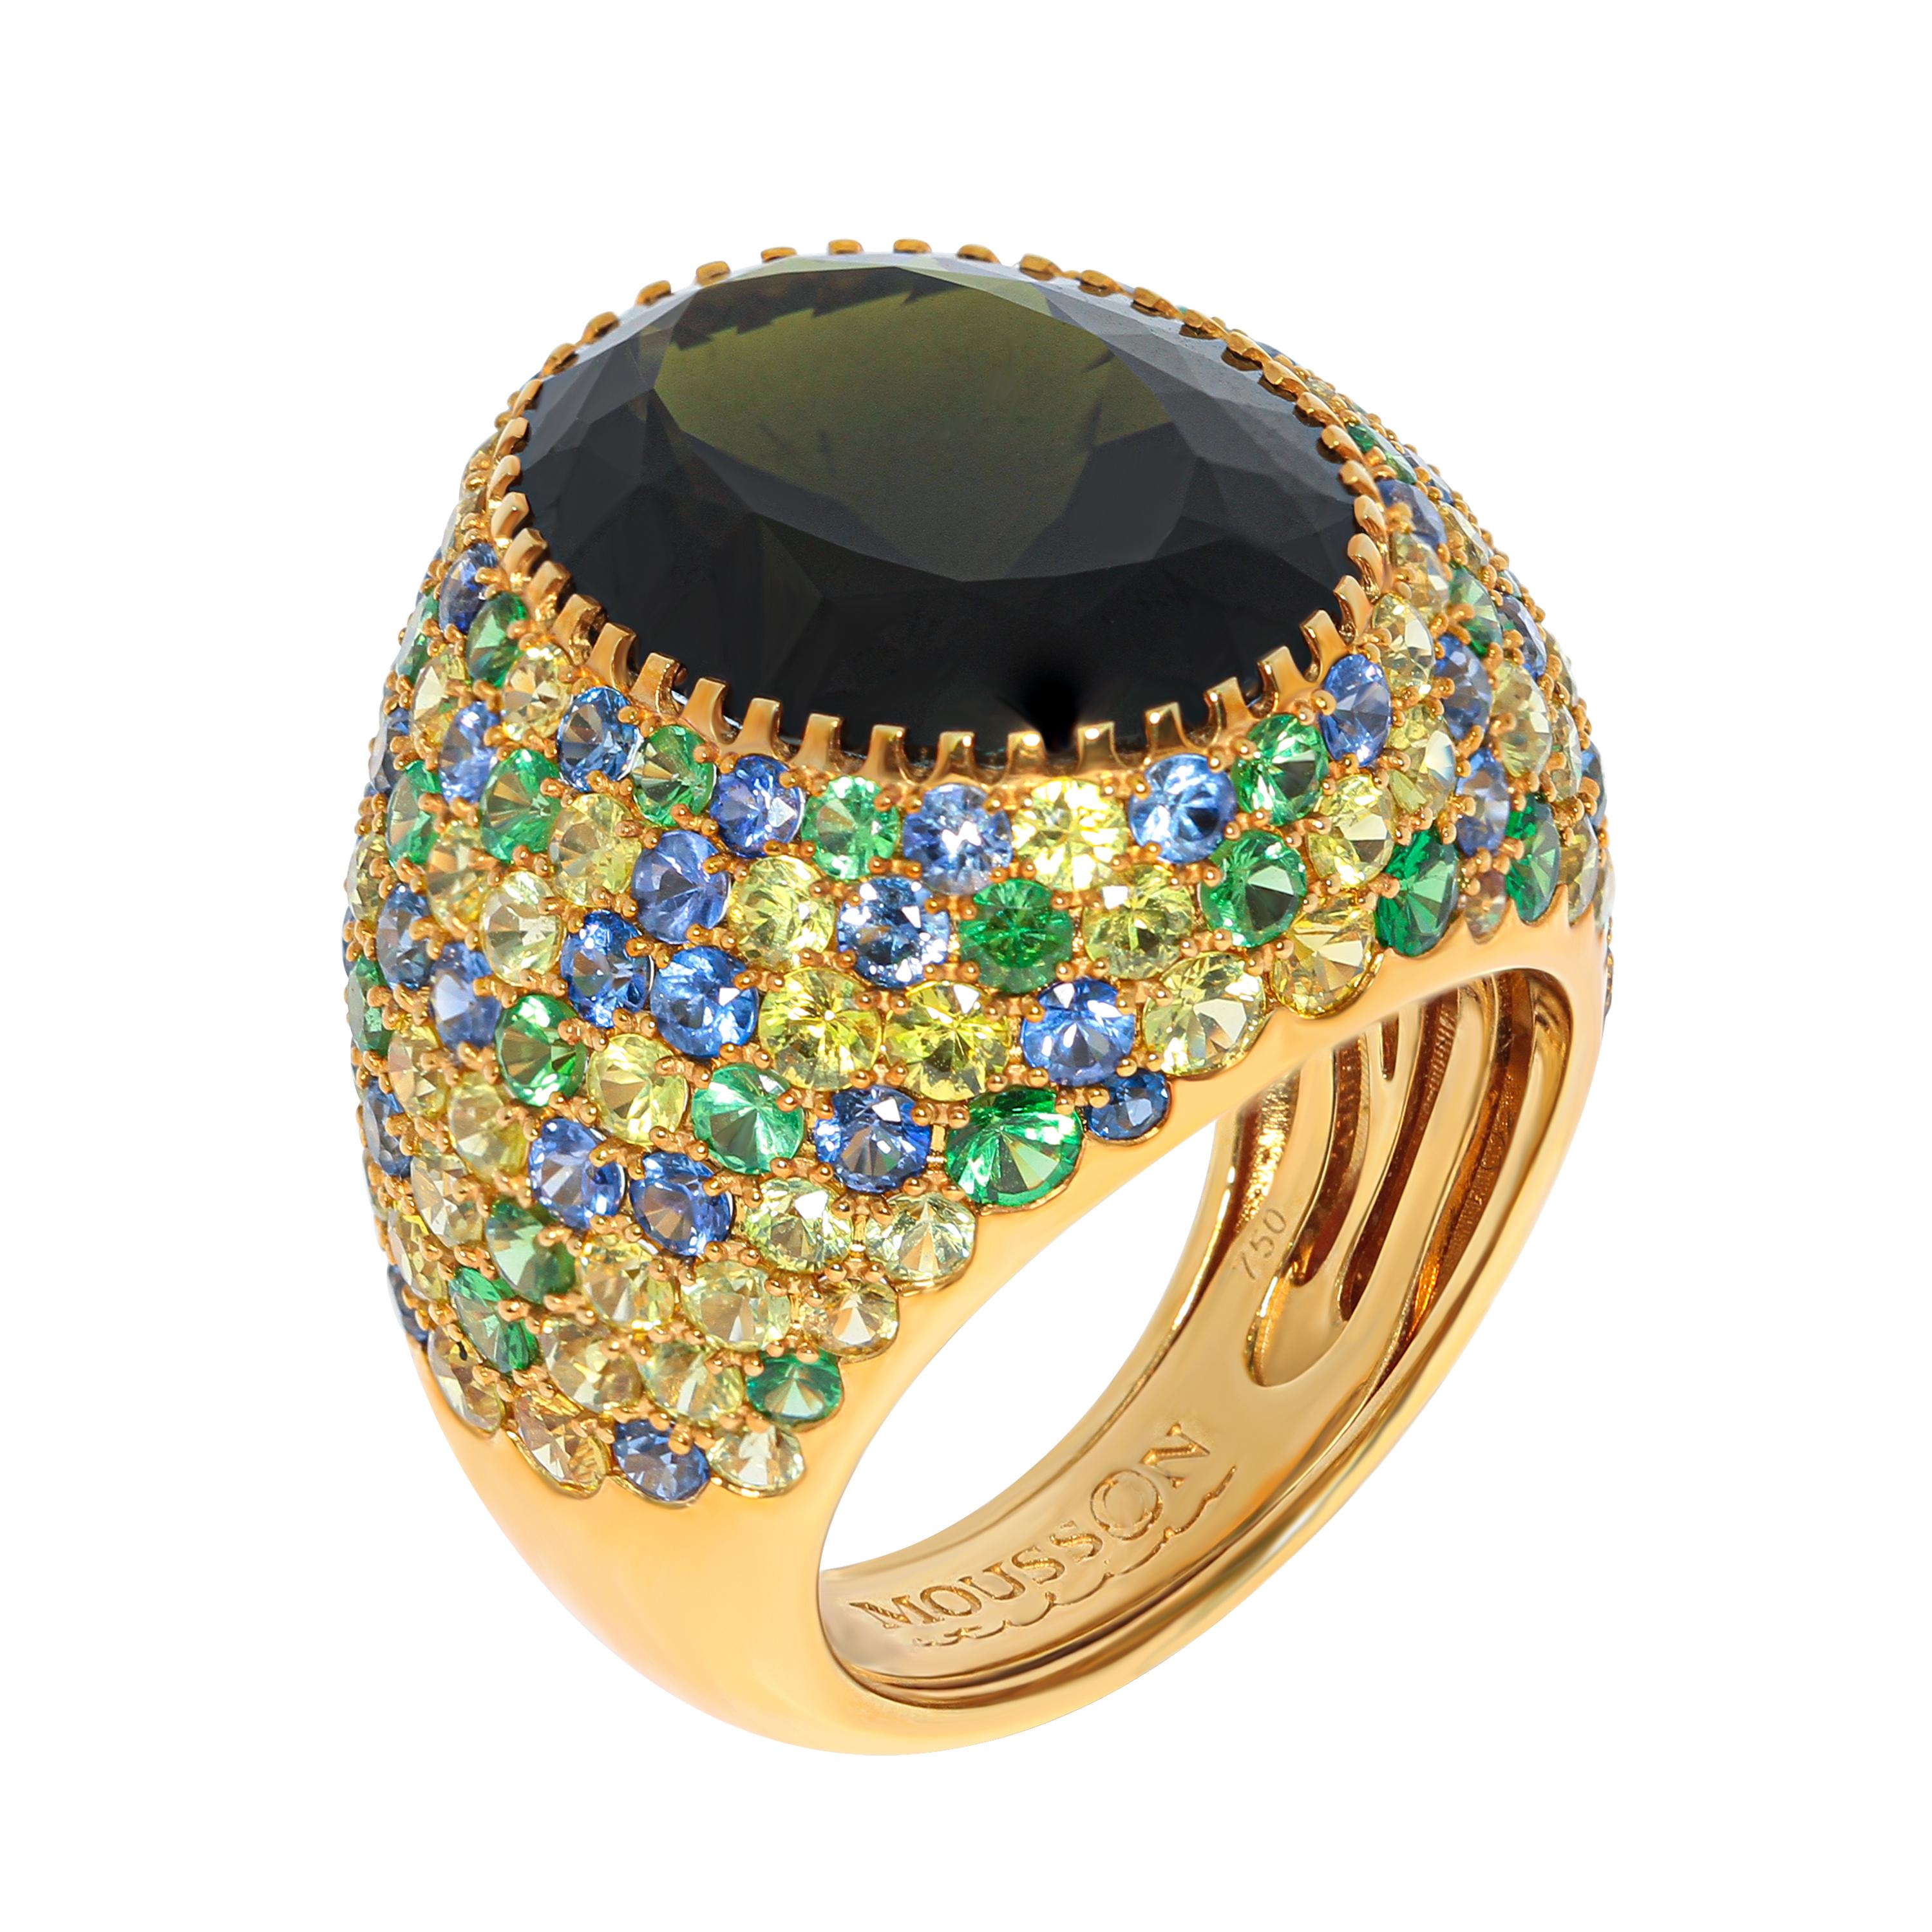 Green Tourmaline 11.94 Carat Sapphires 18 Karat Yellow Gold Riviera Ring
The name and the variety of colours in this collection are associated with the bright Italian and French Riviera, vivid and colourful houses and sun reflections on the water. A